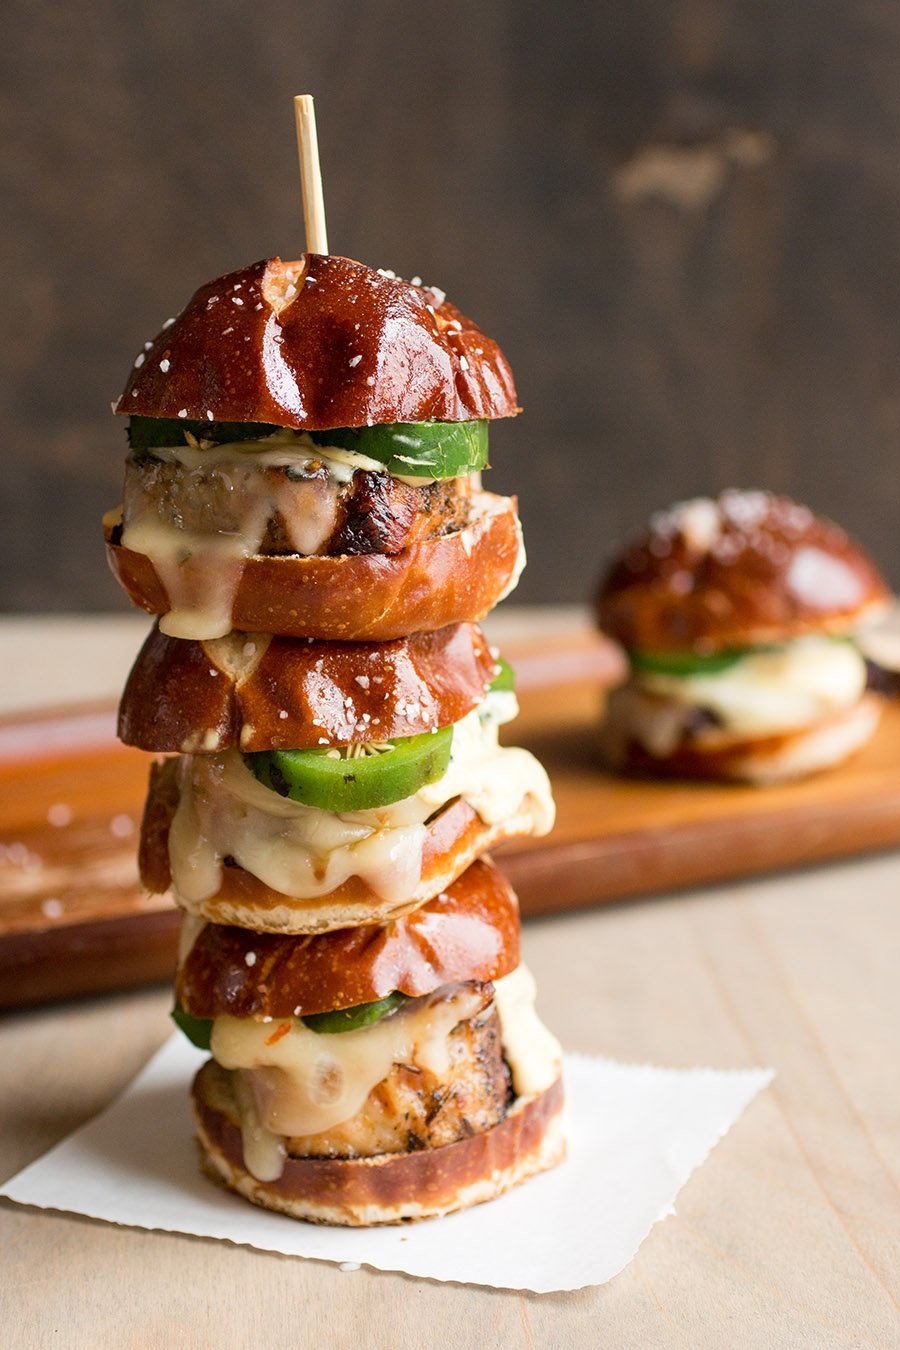 Pork Sliders with Creamy Honey-Mustard served at home